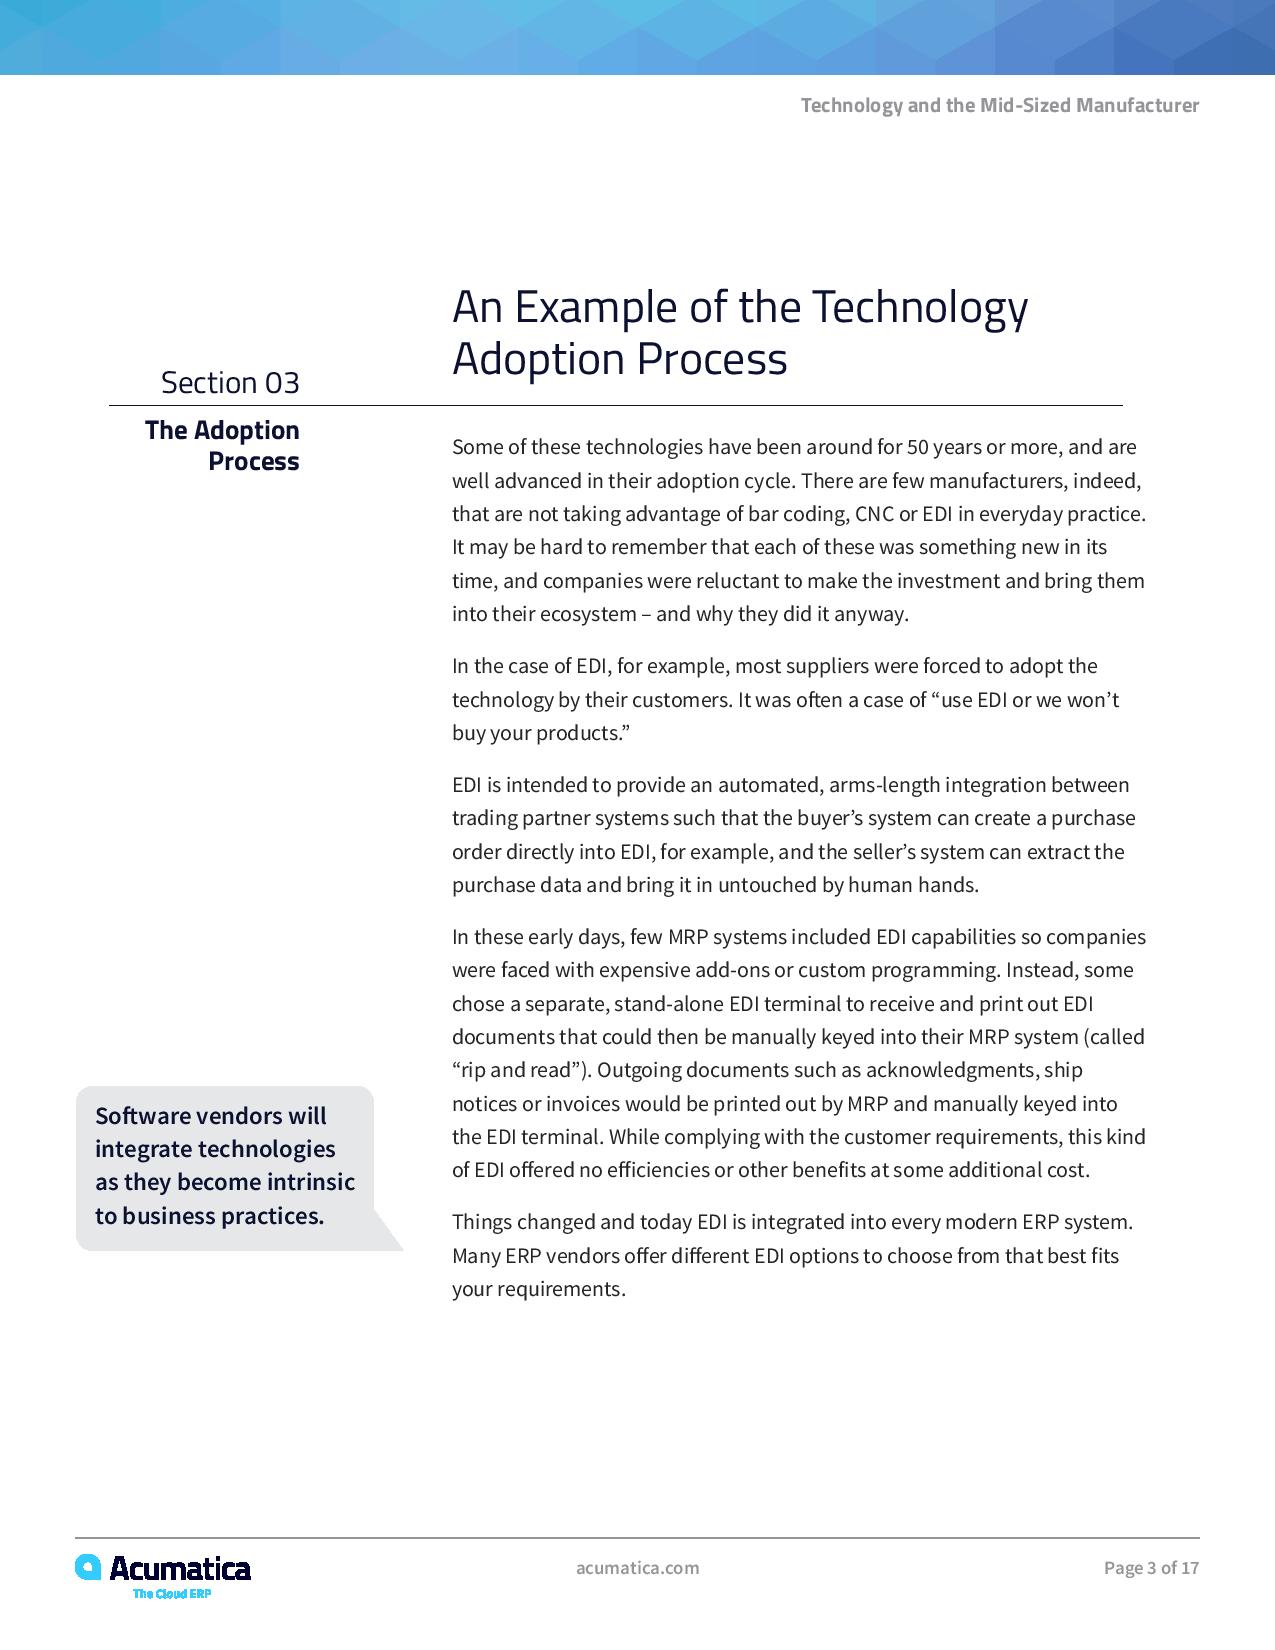 Manufacturing technology: Get all the benefits without all the risk, page 2